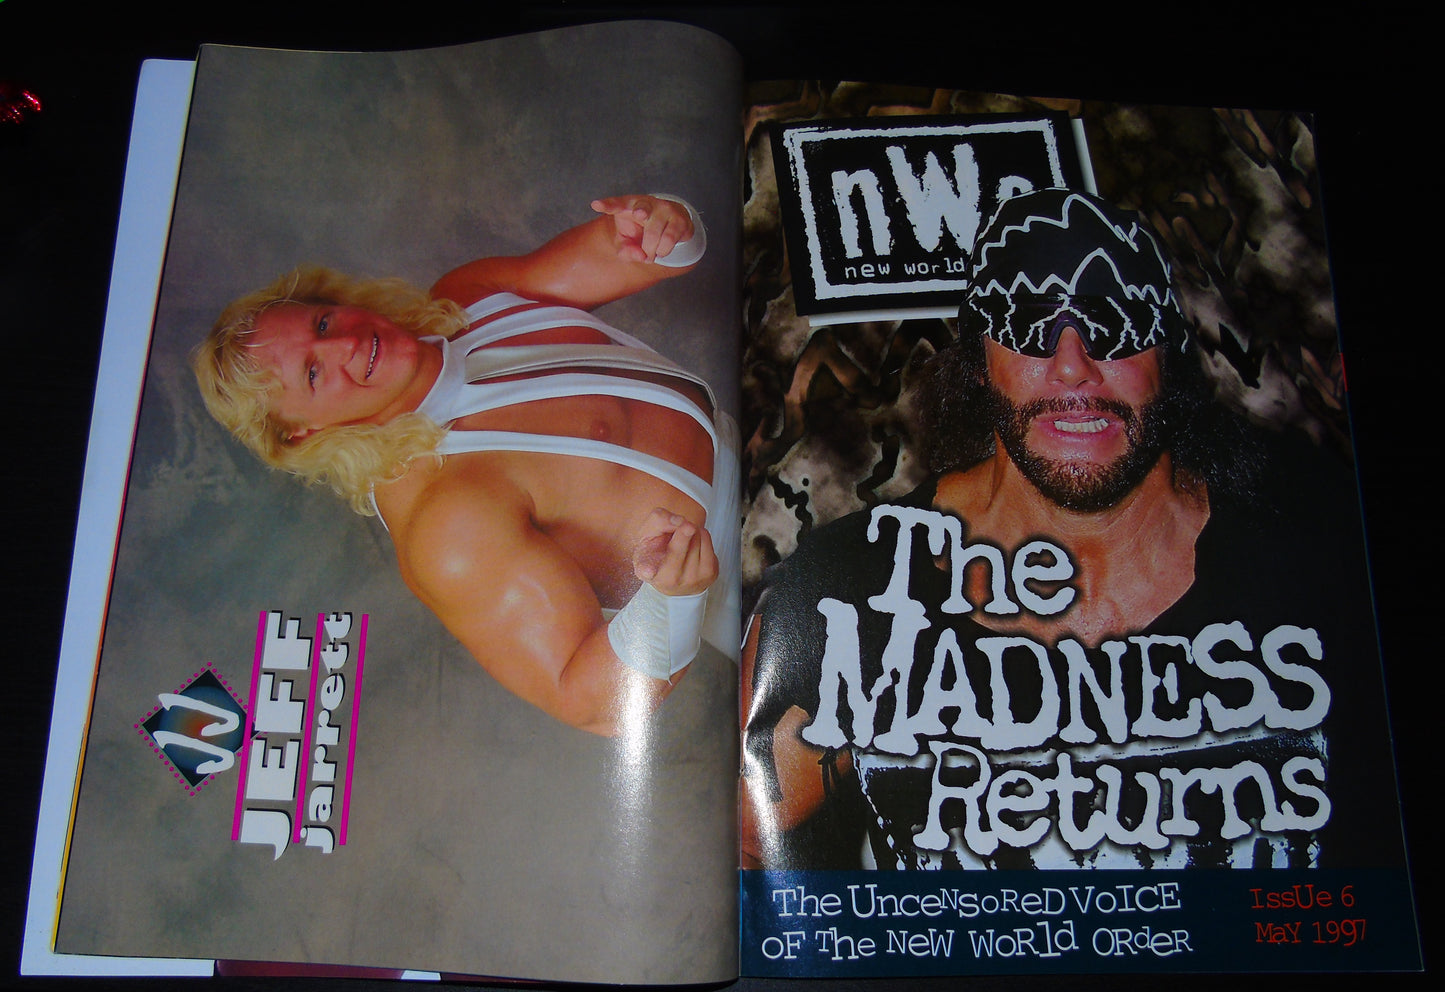 WCW Magazine May 1997 Issue 27